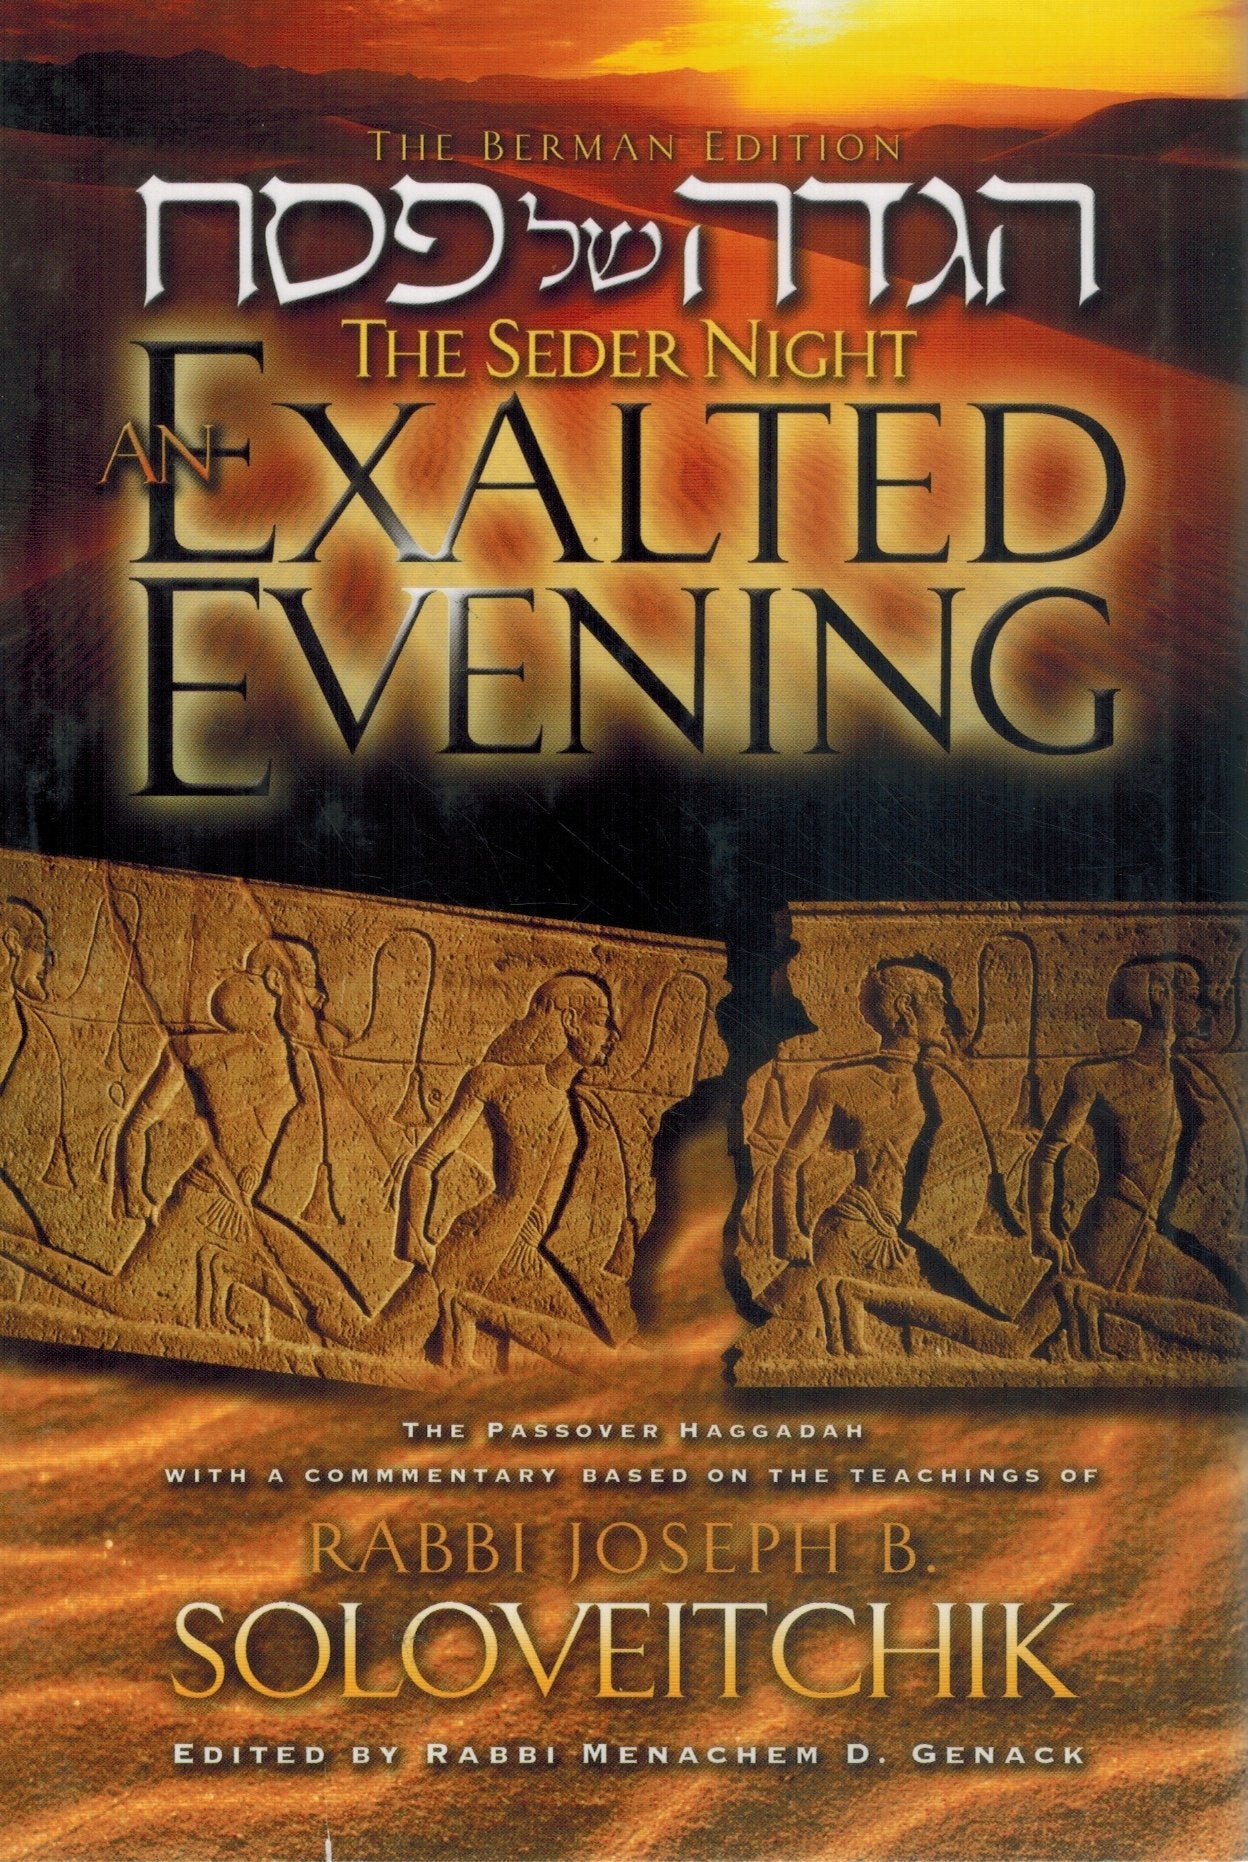 THE SEDER NIGHT An Exalted Evening: the Passover Haggadah: with a  Commentary Based on the Teachings of Rabbi Joseph B. Soloveitchik  by Soloveitchik, Joseph B.